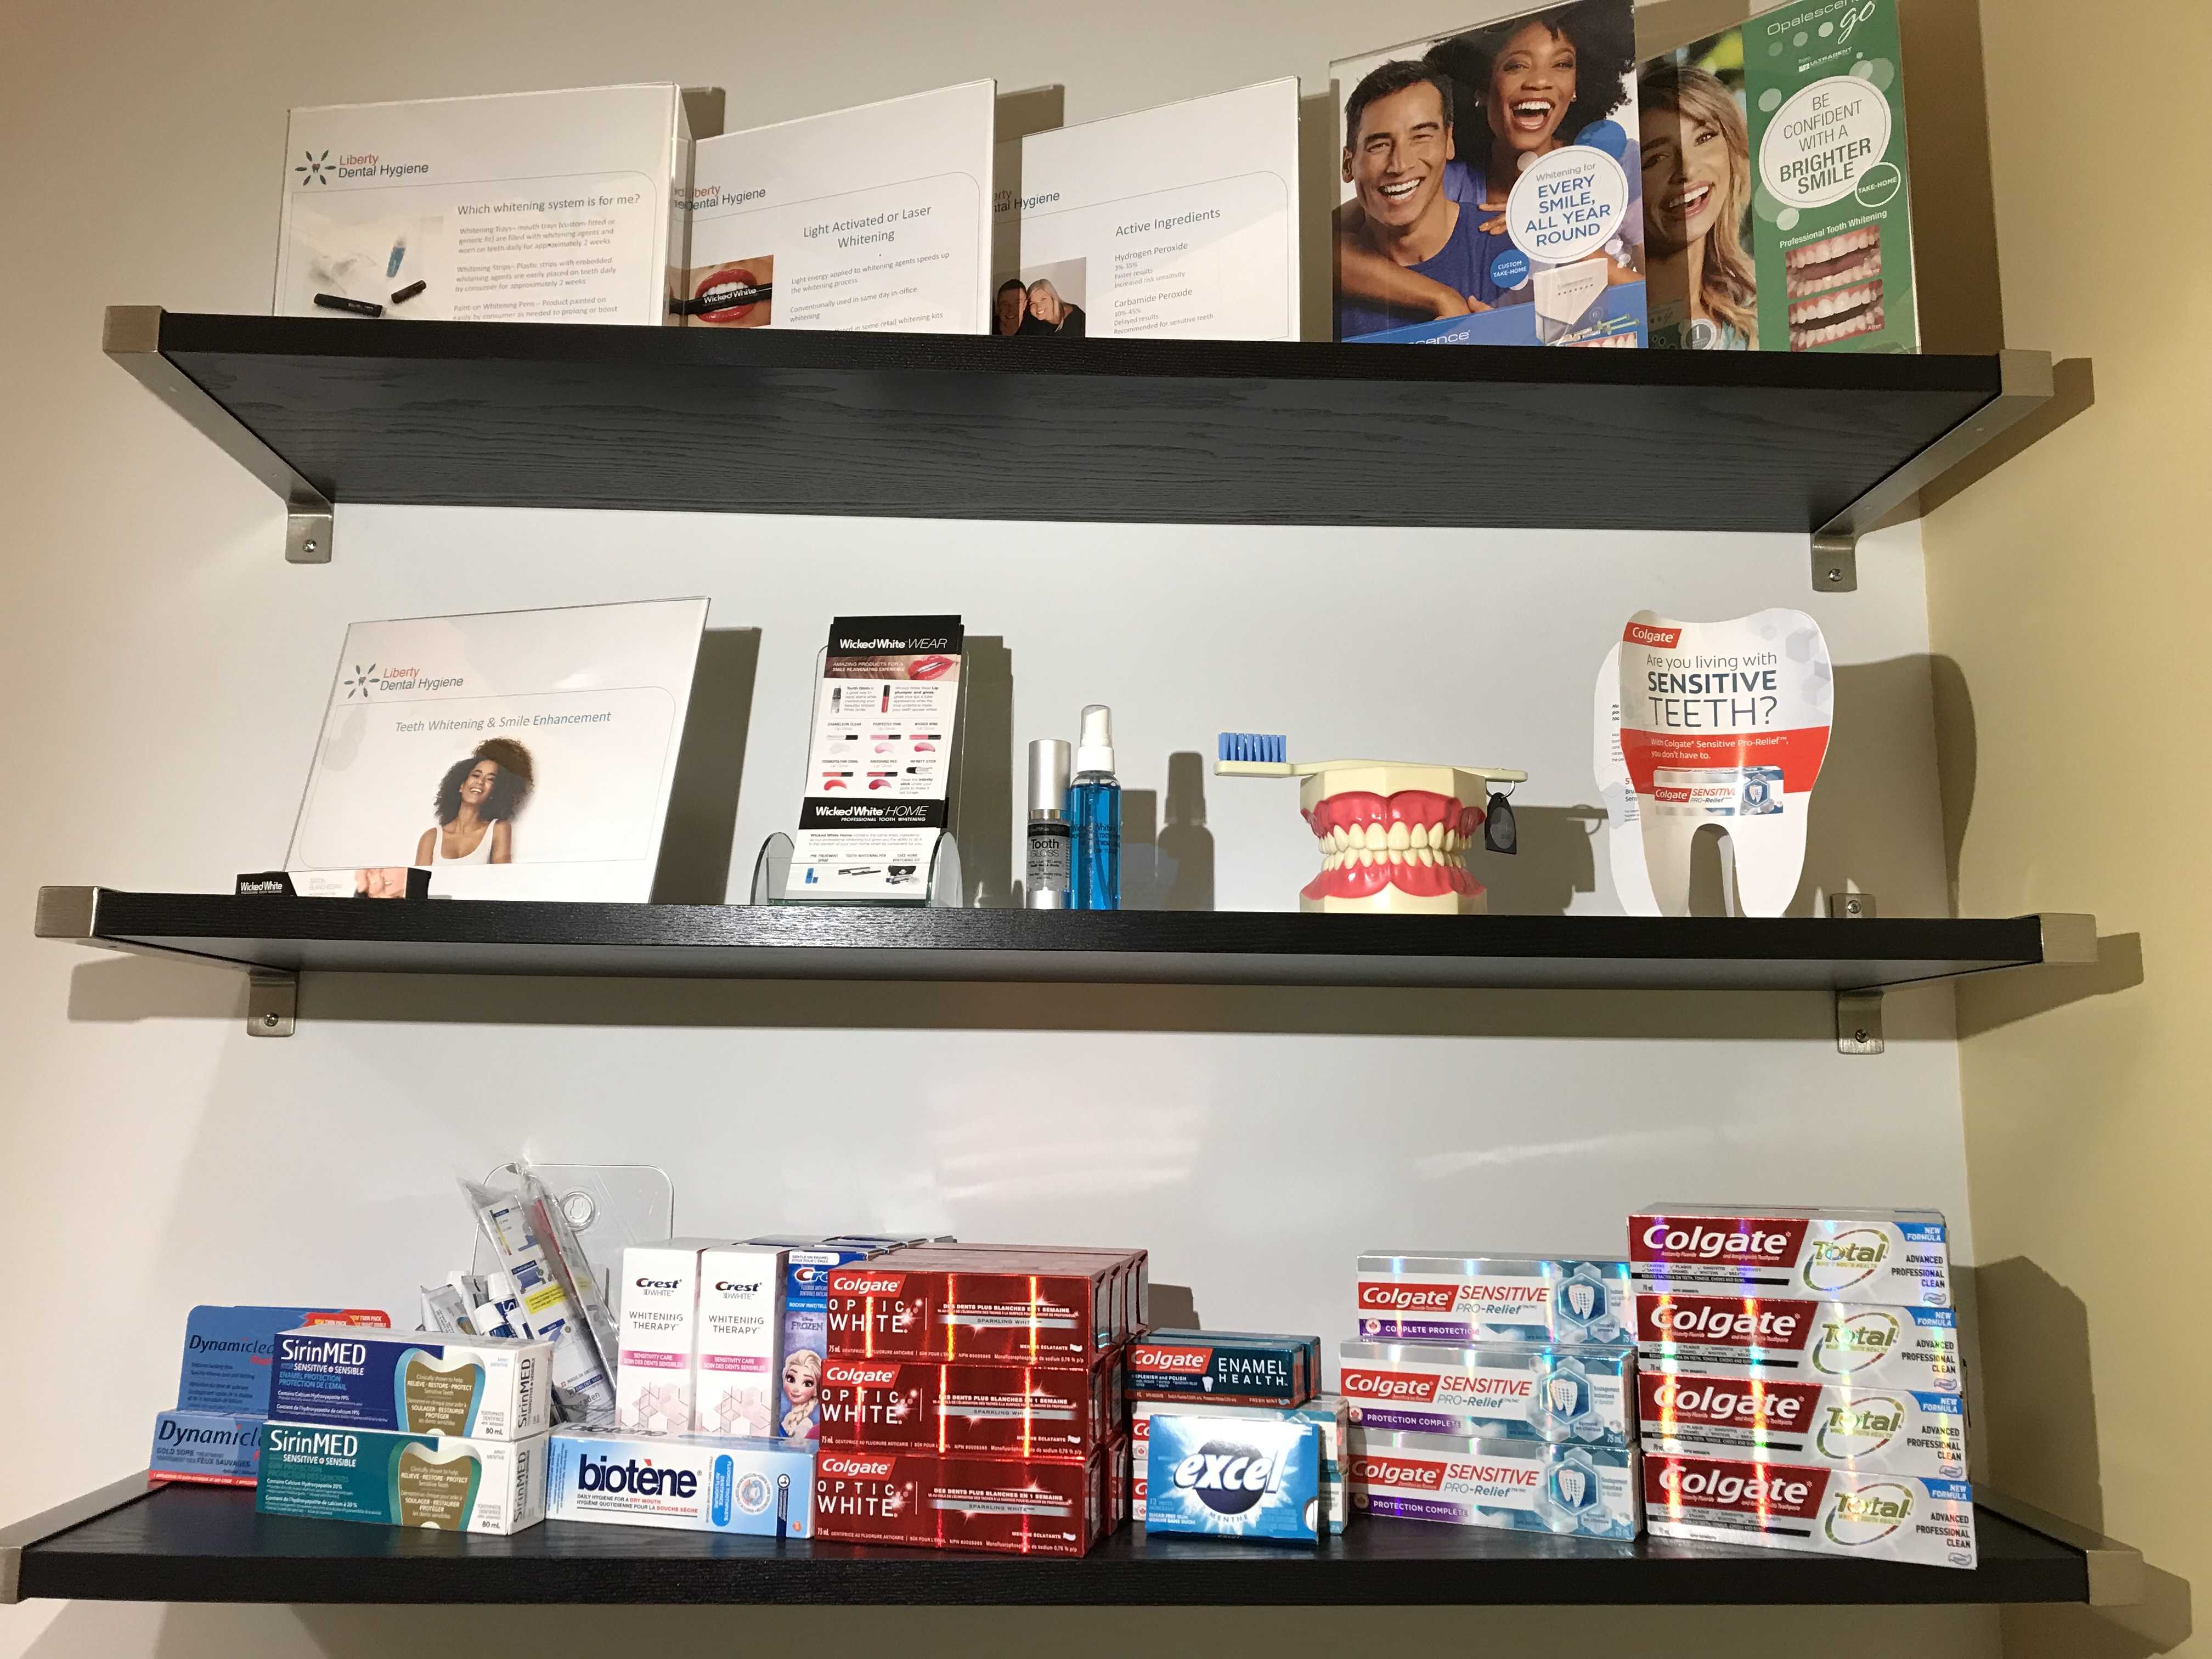 Supplies available at Dental Office